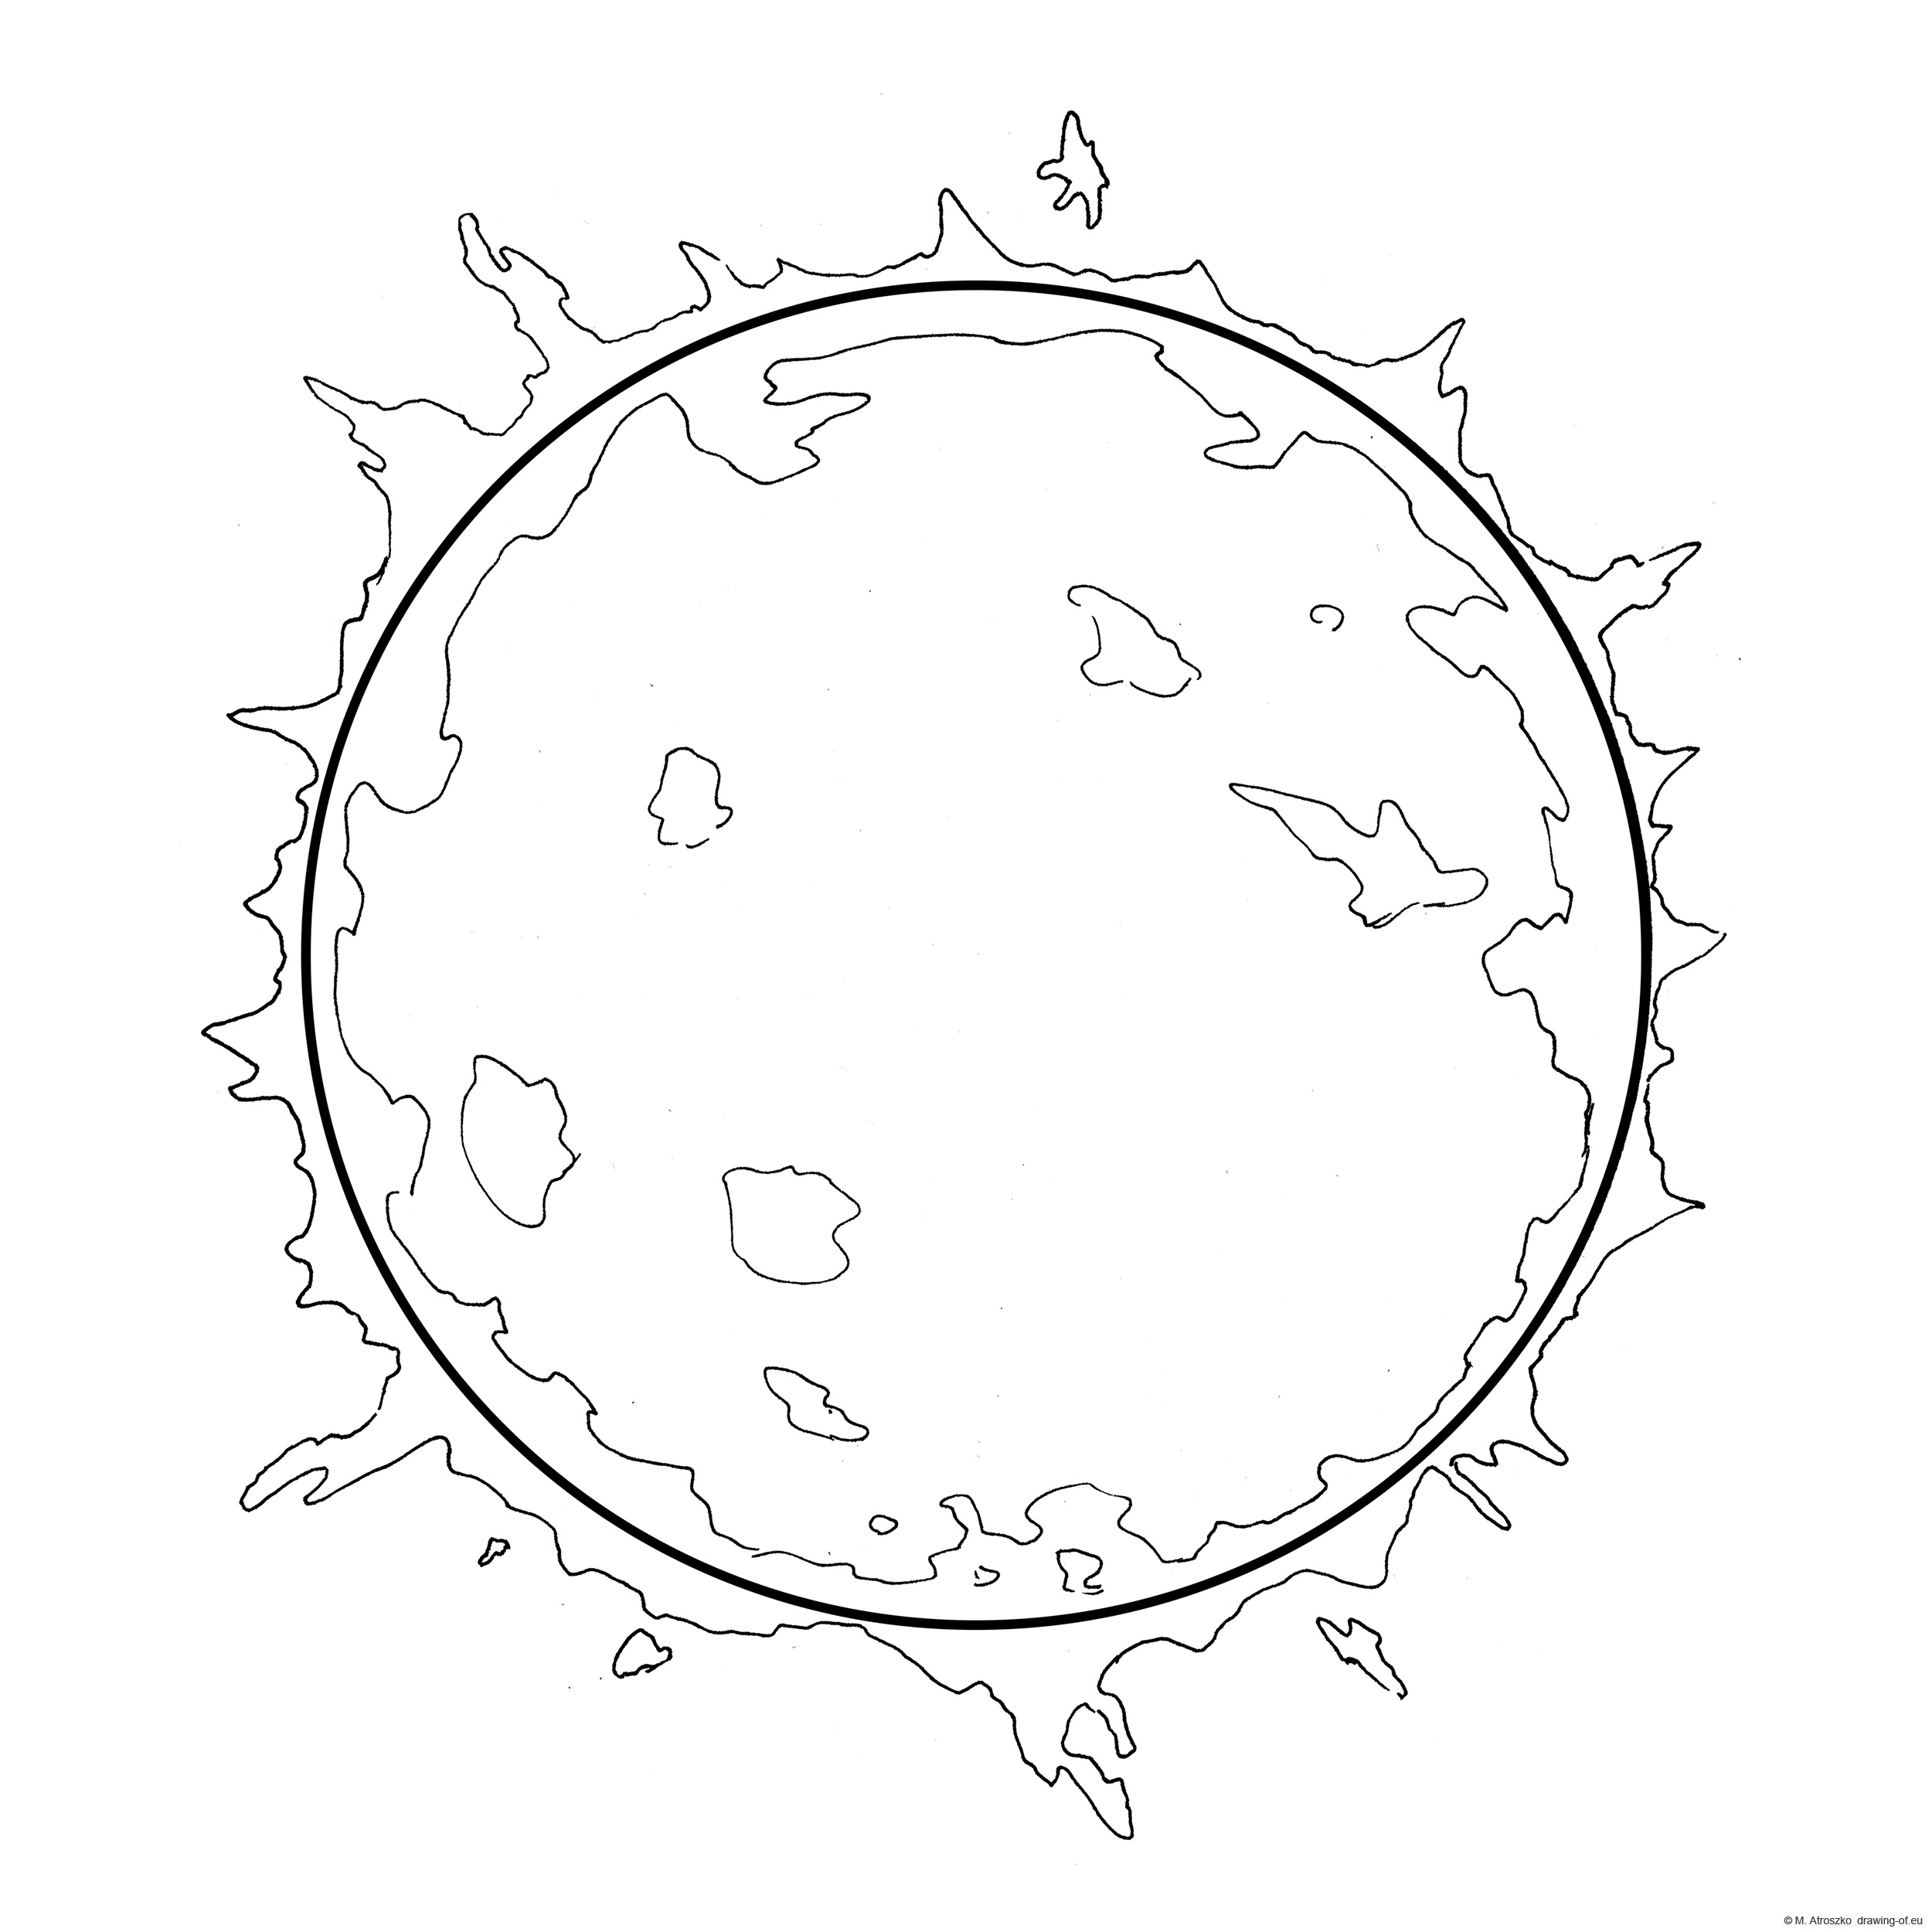 The Sun - coloring page